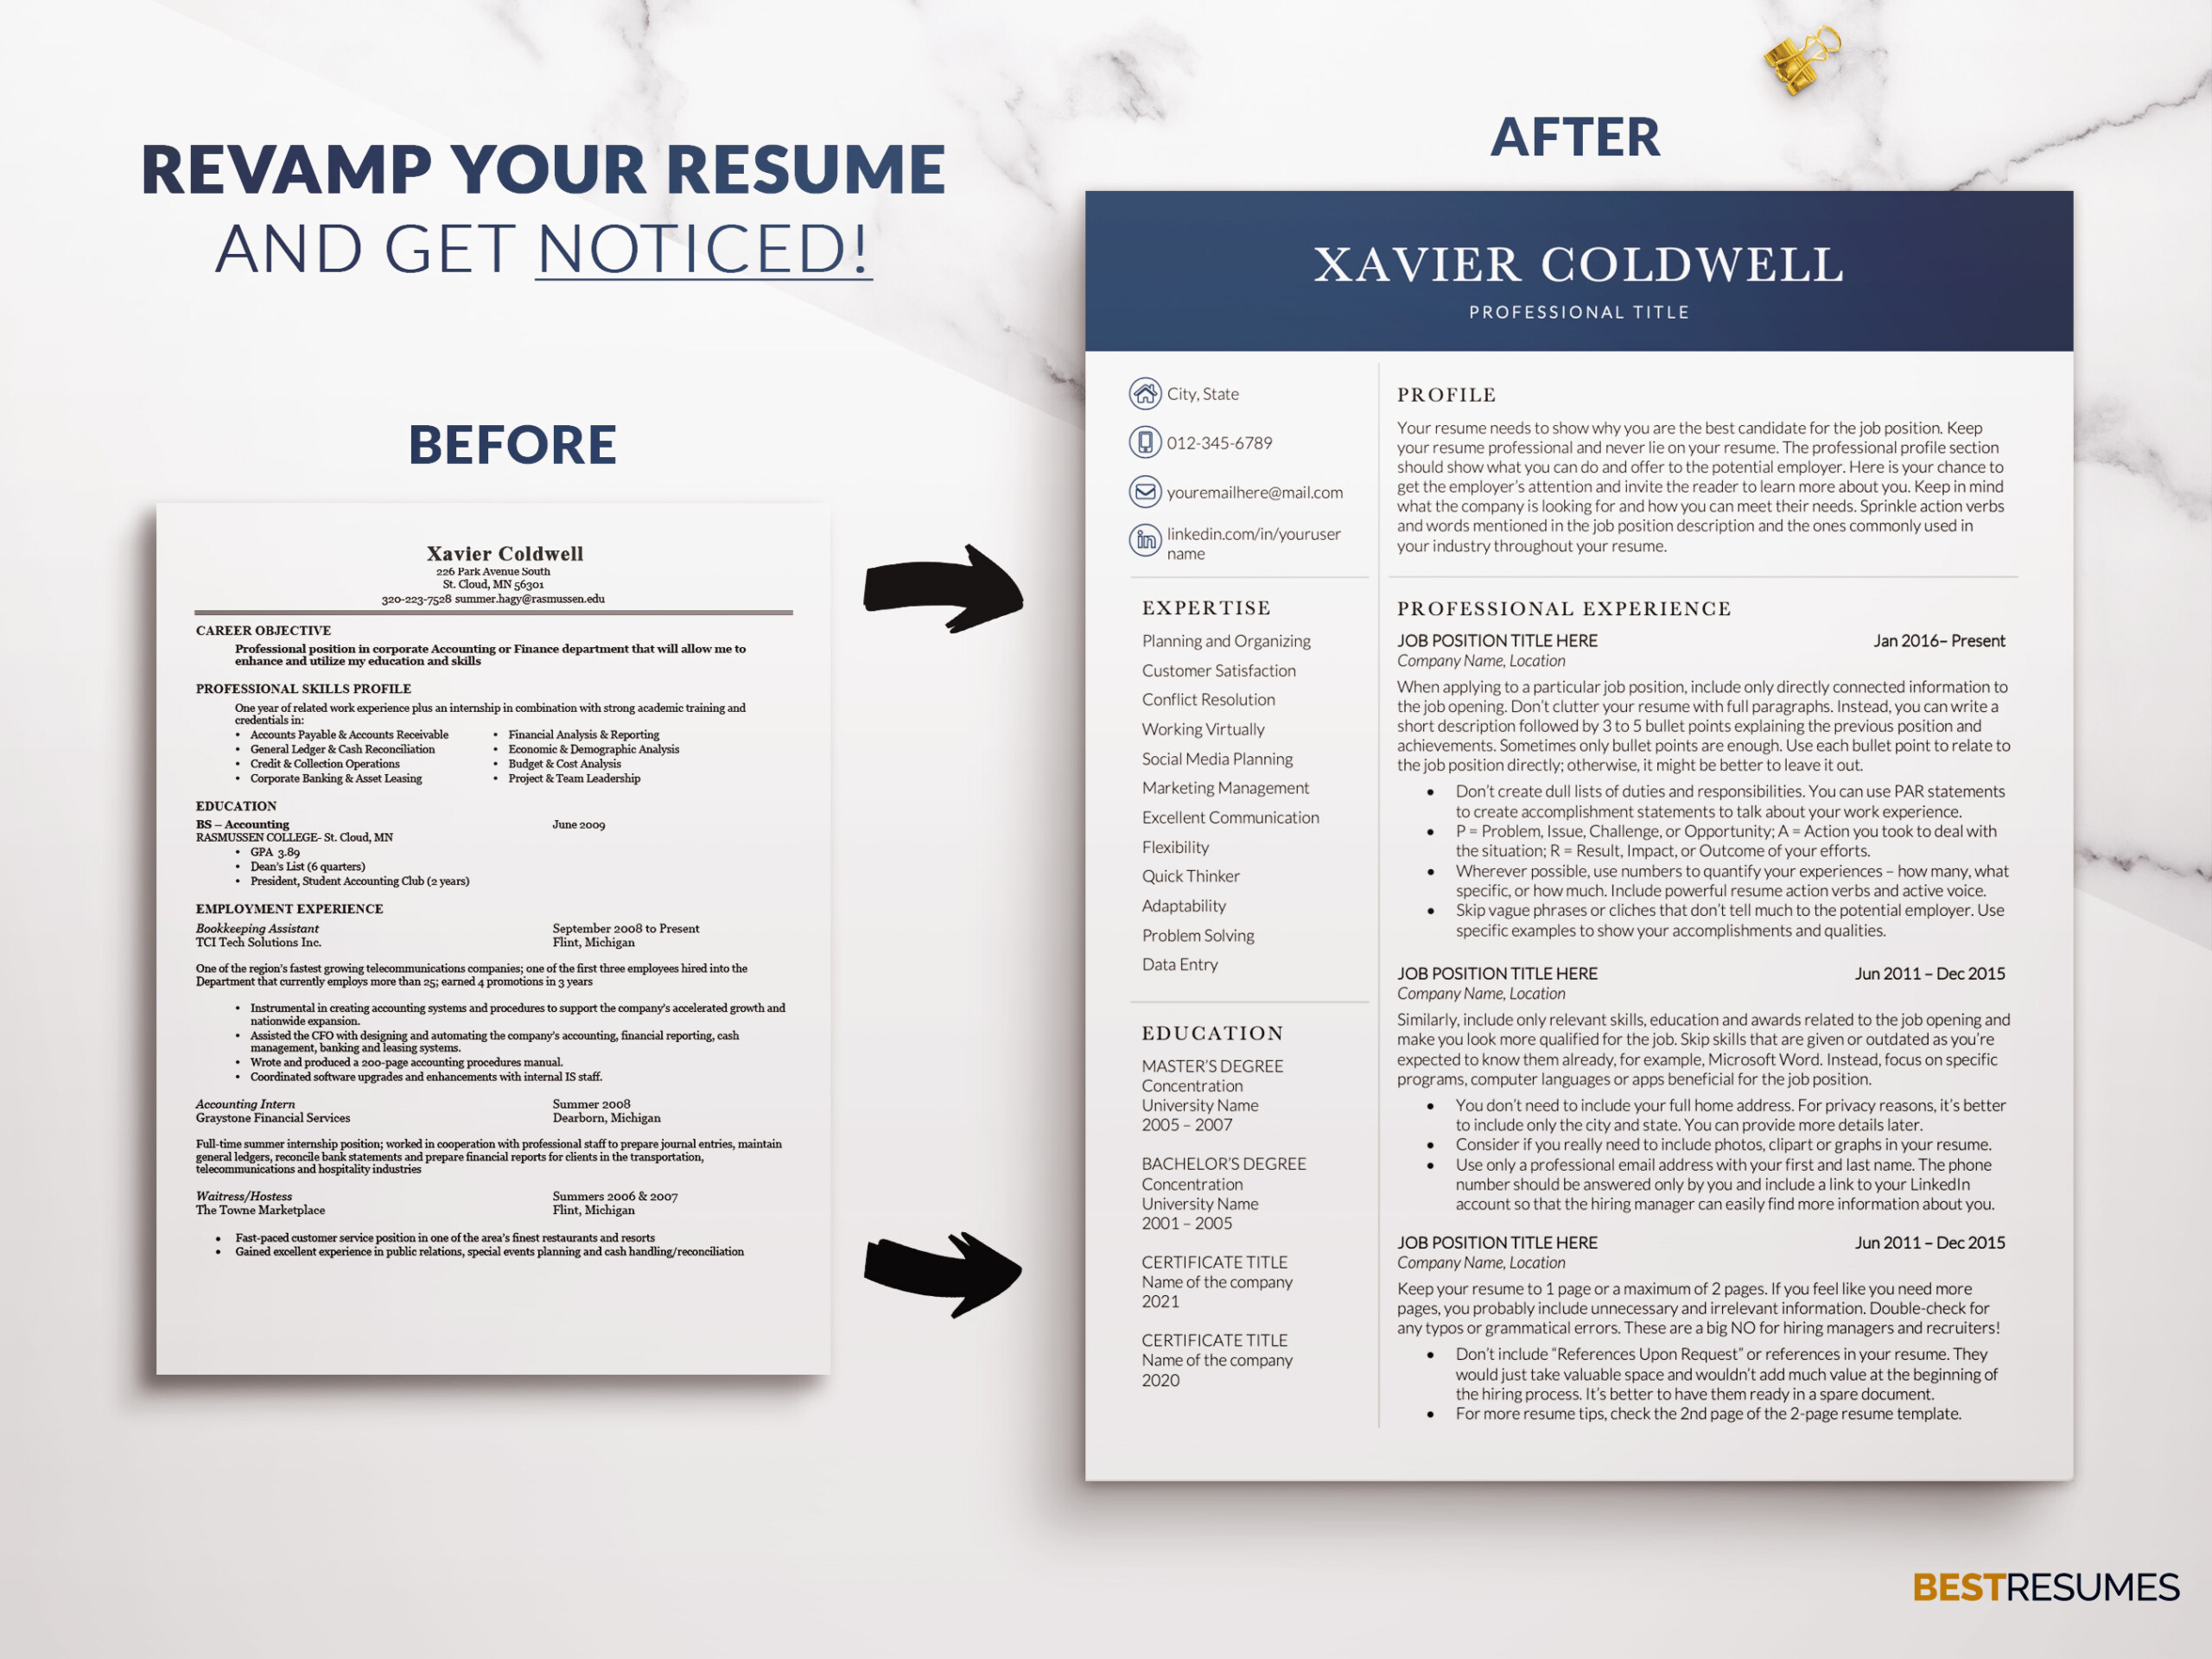 Professional Financial Resume Template for Word Revamp your Resume Xavier Coldwell